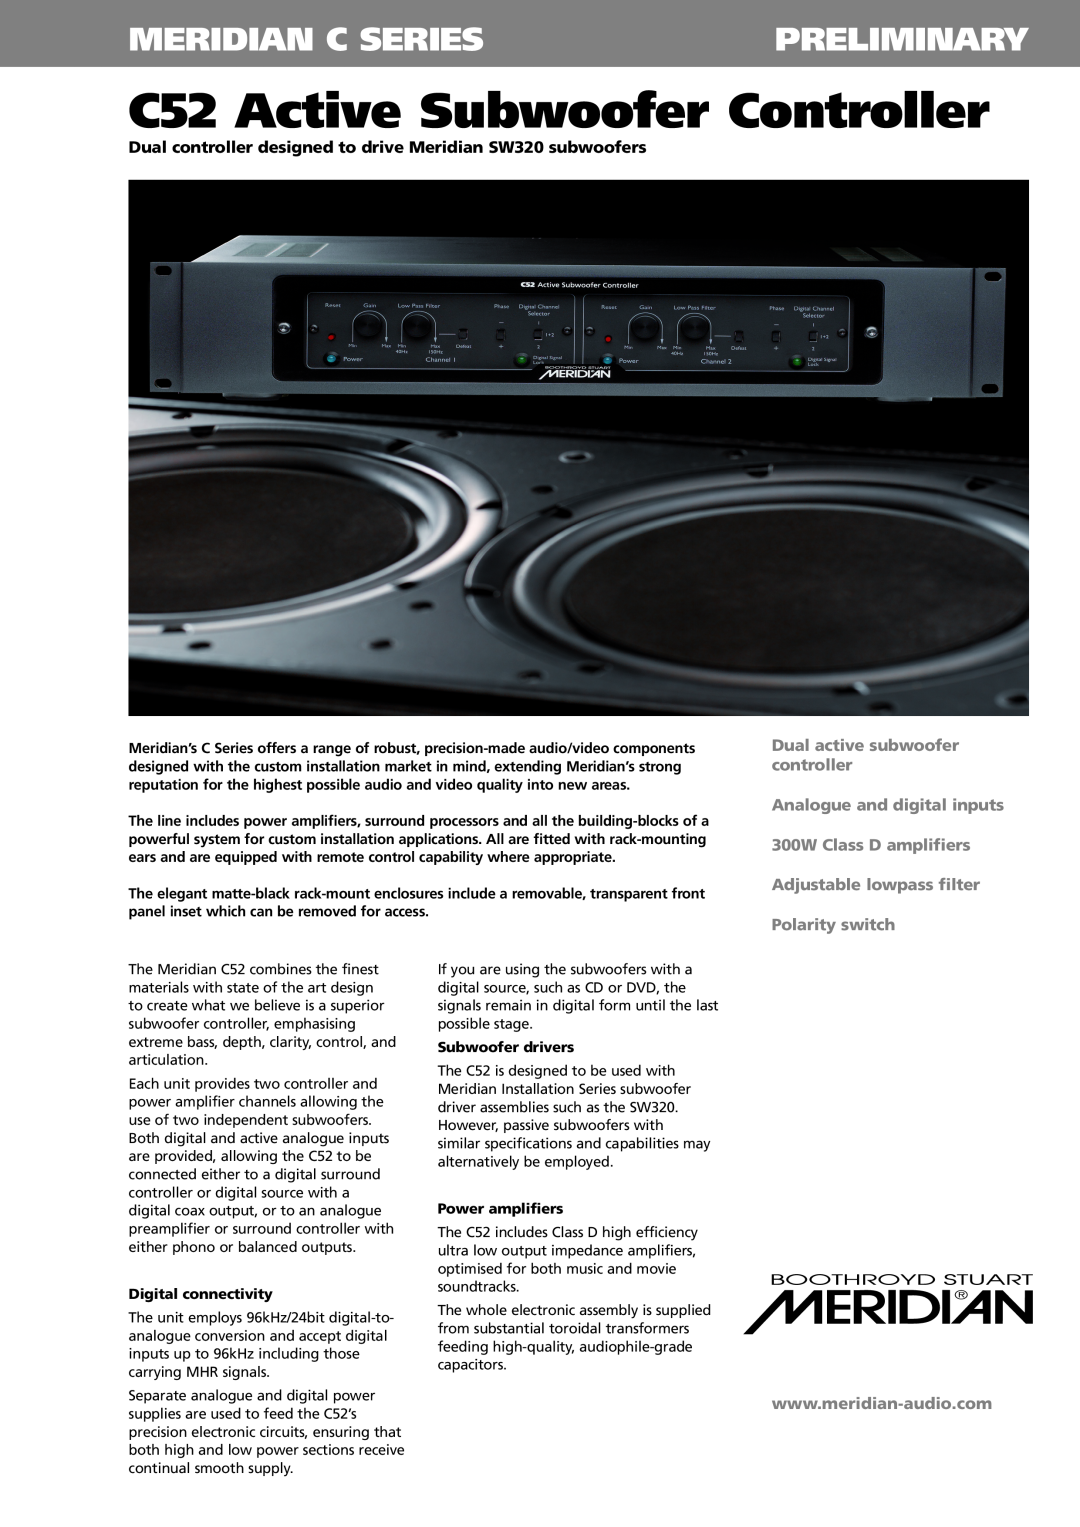 Meridian America C52 specifications Meridian C Seriespreliminary, Dual active subwoofer controller, Digital connectivity 